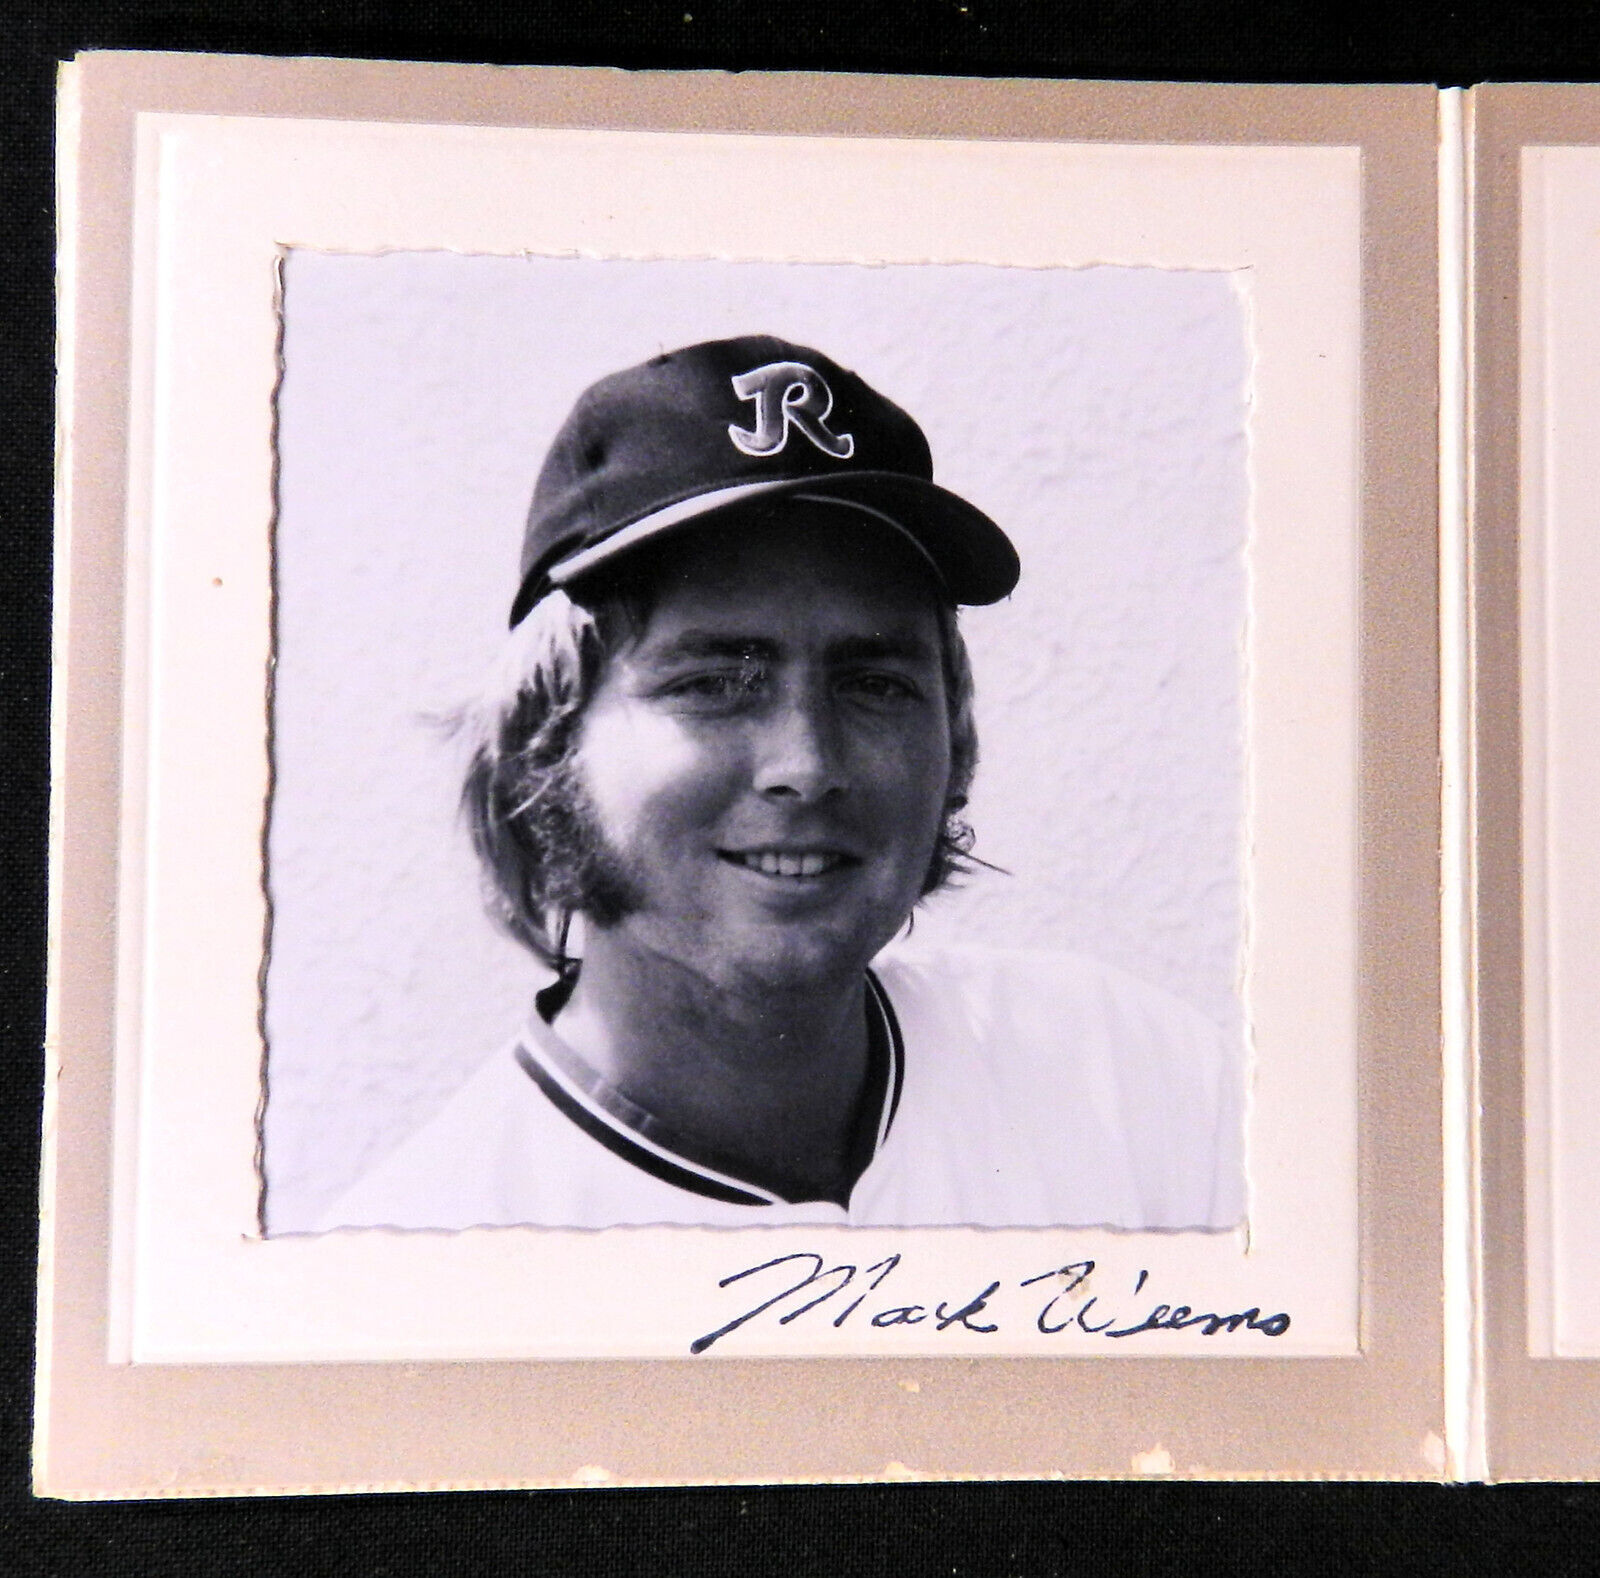 1973 Mark Weems Signed Authograph Rochester Red Wings Camera Day Fold-Out